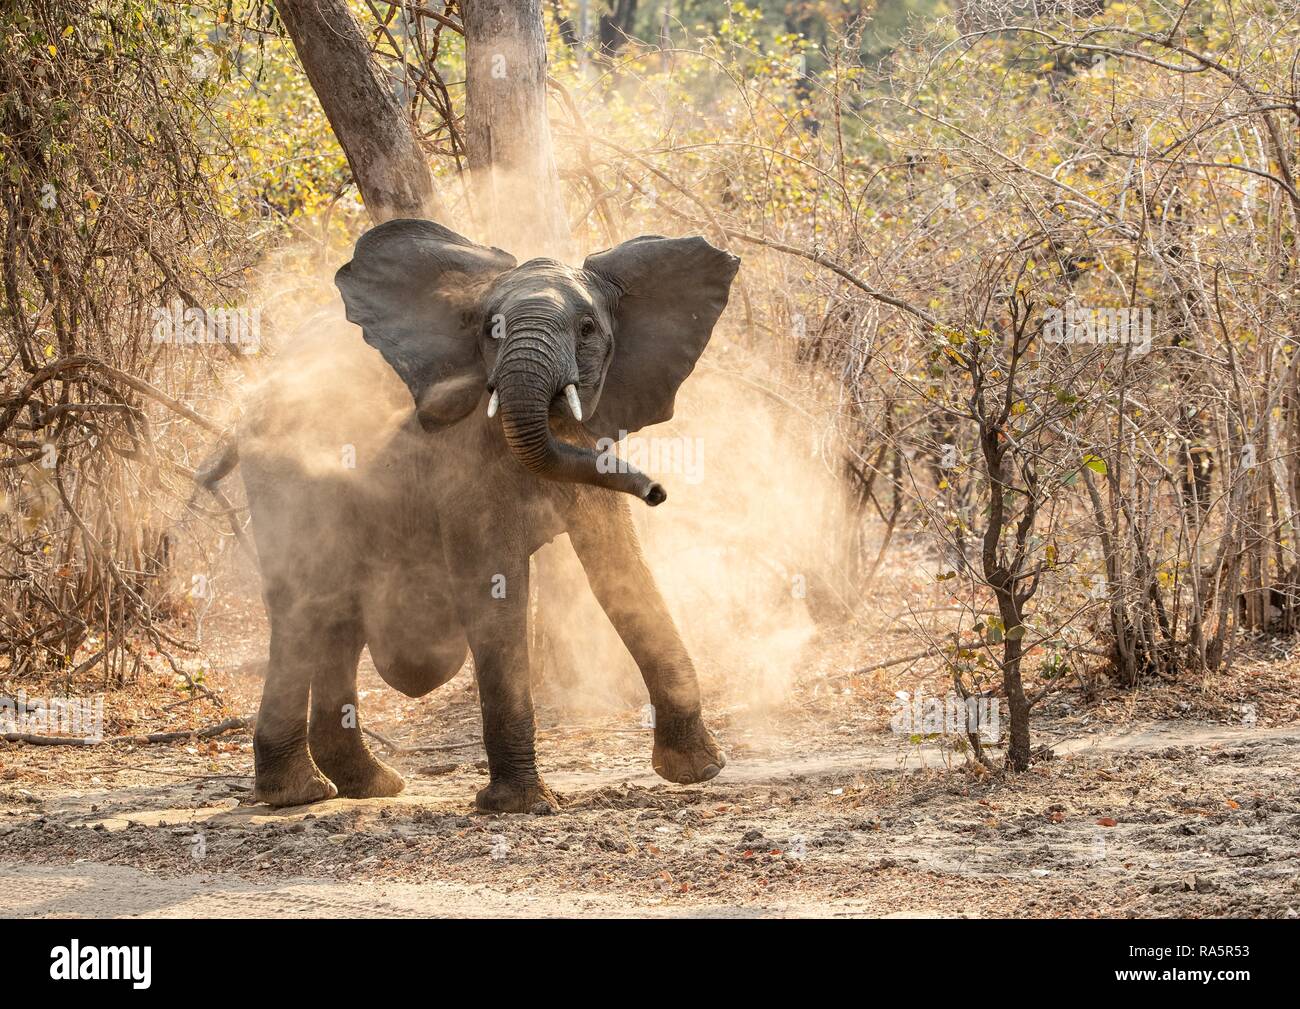 African elephant (Loxodonta africana) with a ventral hernia dust bathing, Zambia, Africa Stock Photo